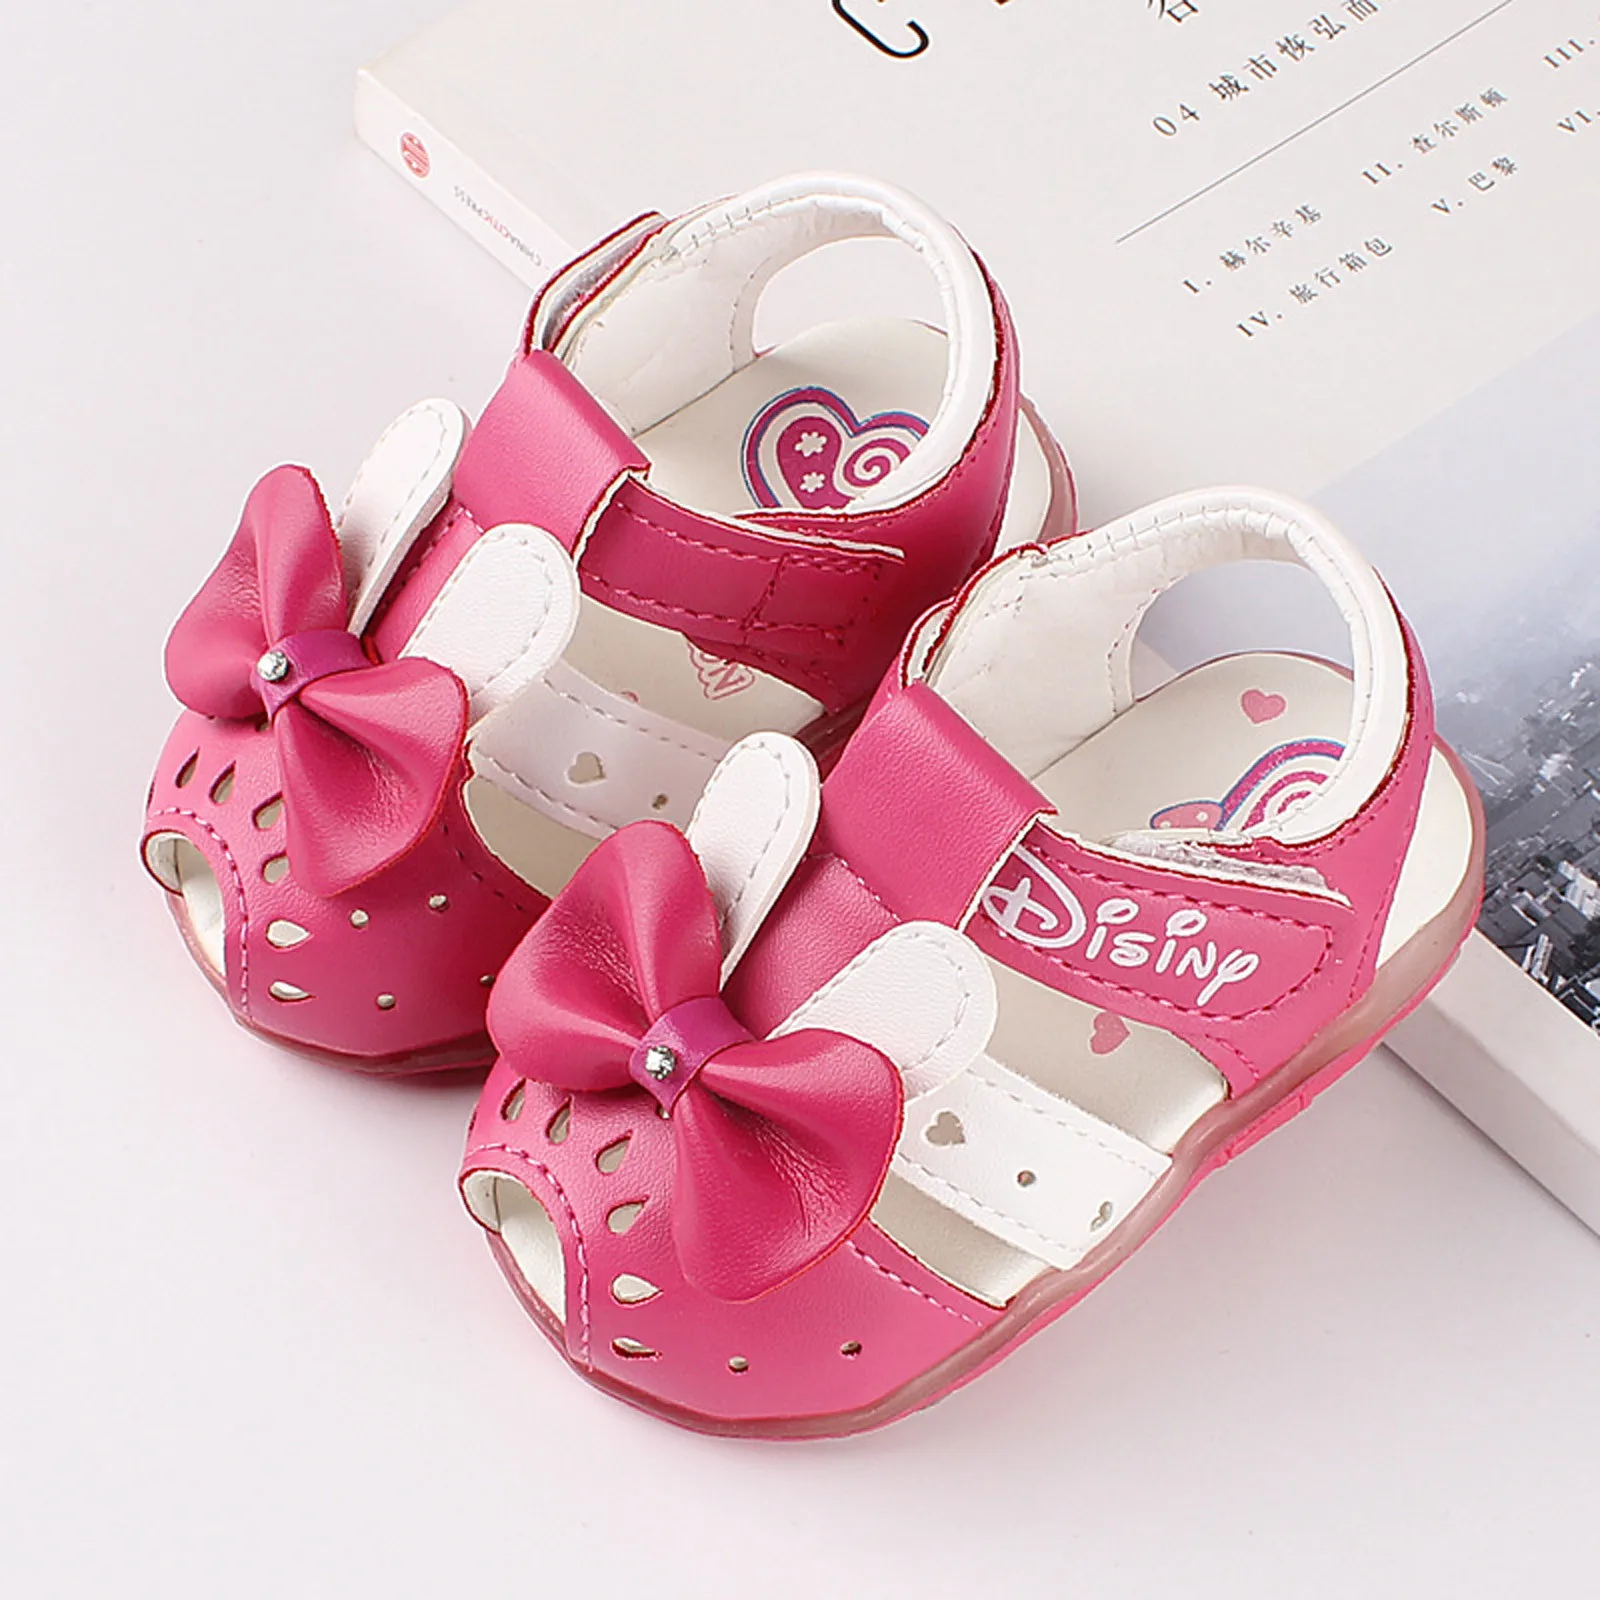 Toddler Flowers Girls Sandals Lighted Soft-Soled Princess Baby Shoes 0-3.5Years 